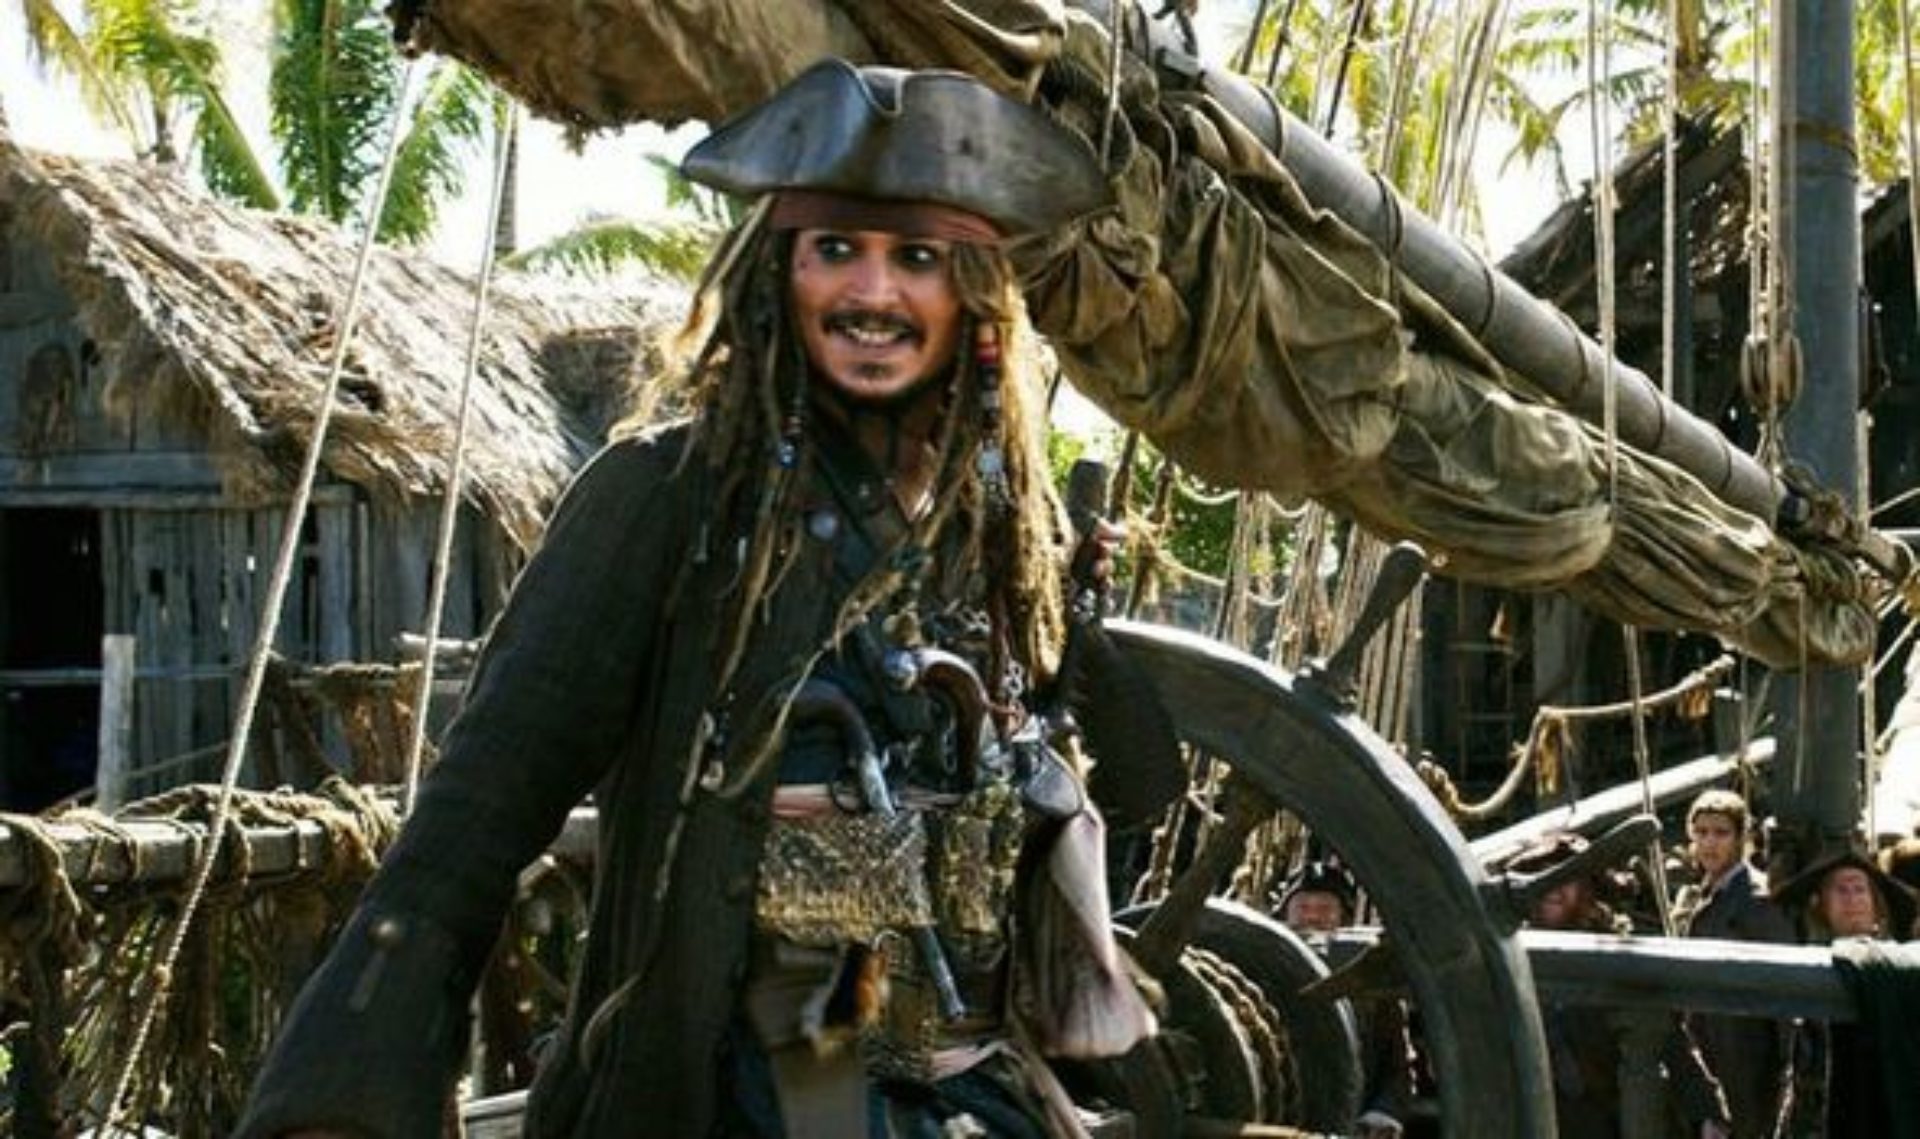 pirates of the caribbean 6